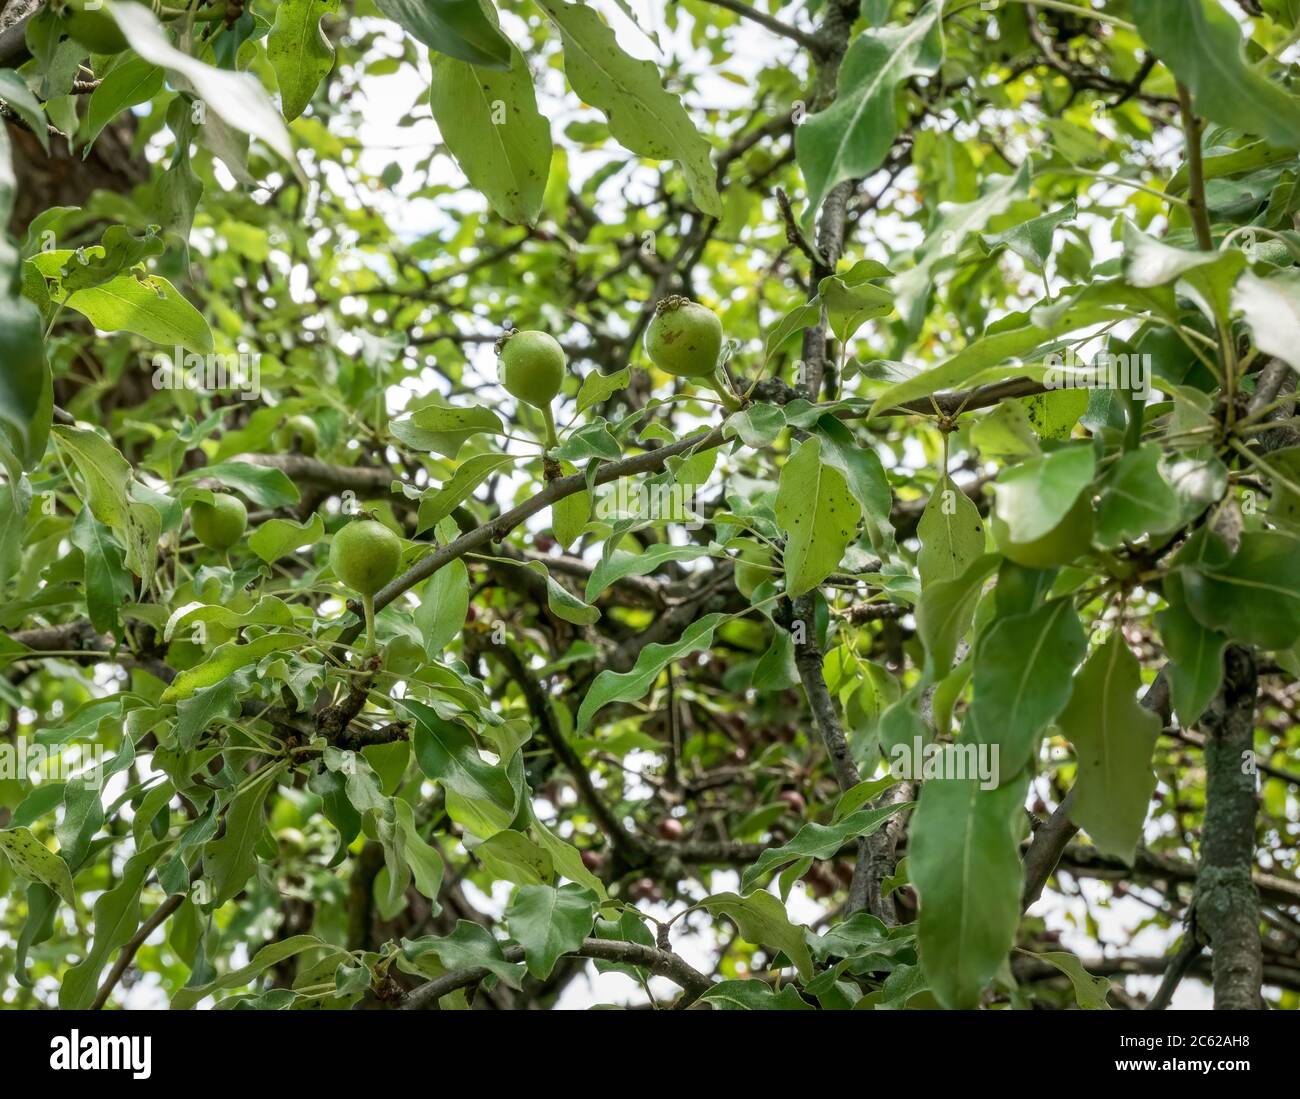 Pyrus elaeagrifolia or the oleaster-leafed pear fruit hanging on a tree branch. Stock Photo